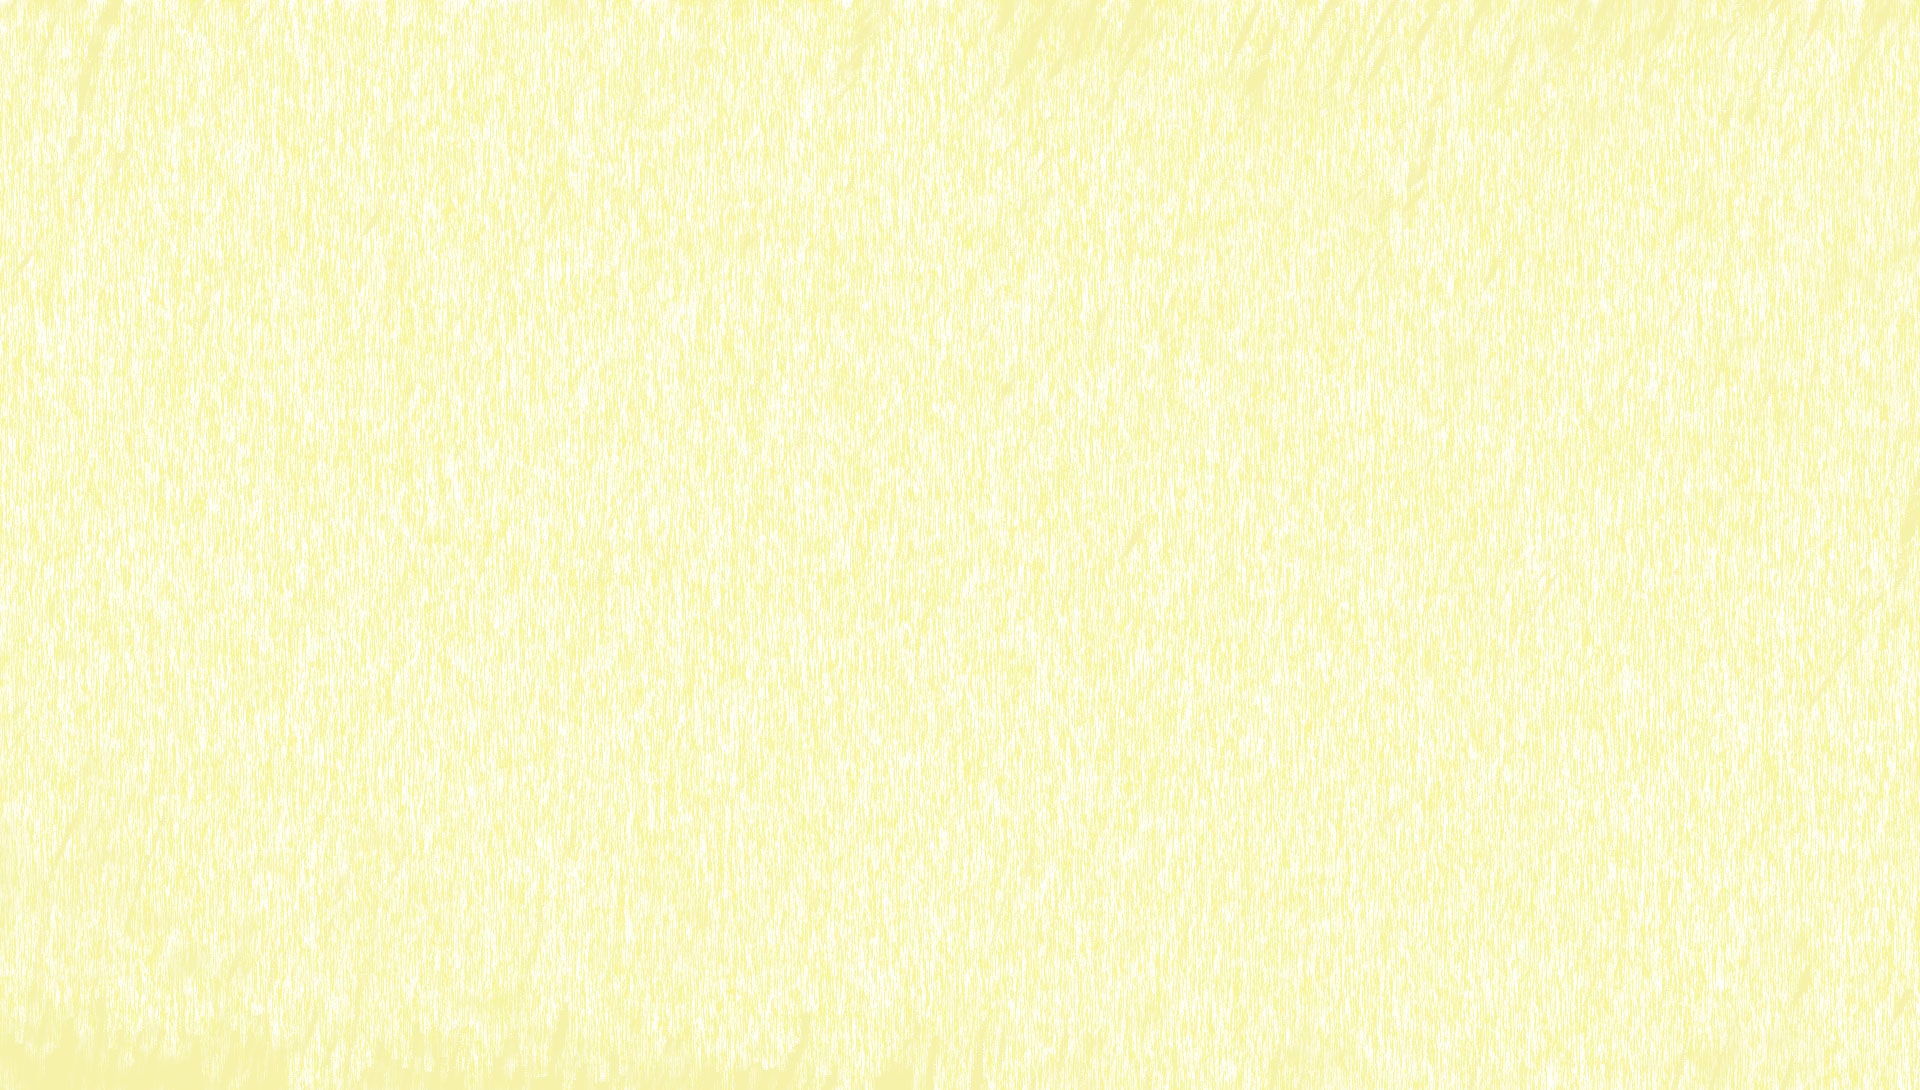 Natural Yellow Paint Texture Background Free Image By Marinemynt Yellow  Aesthetic Pastel, Yellow Painting, Textured Background |  :443